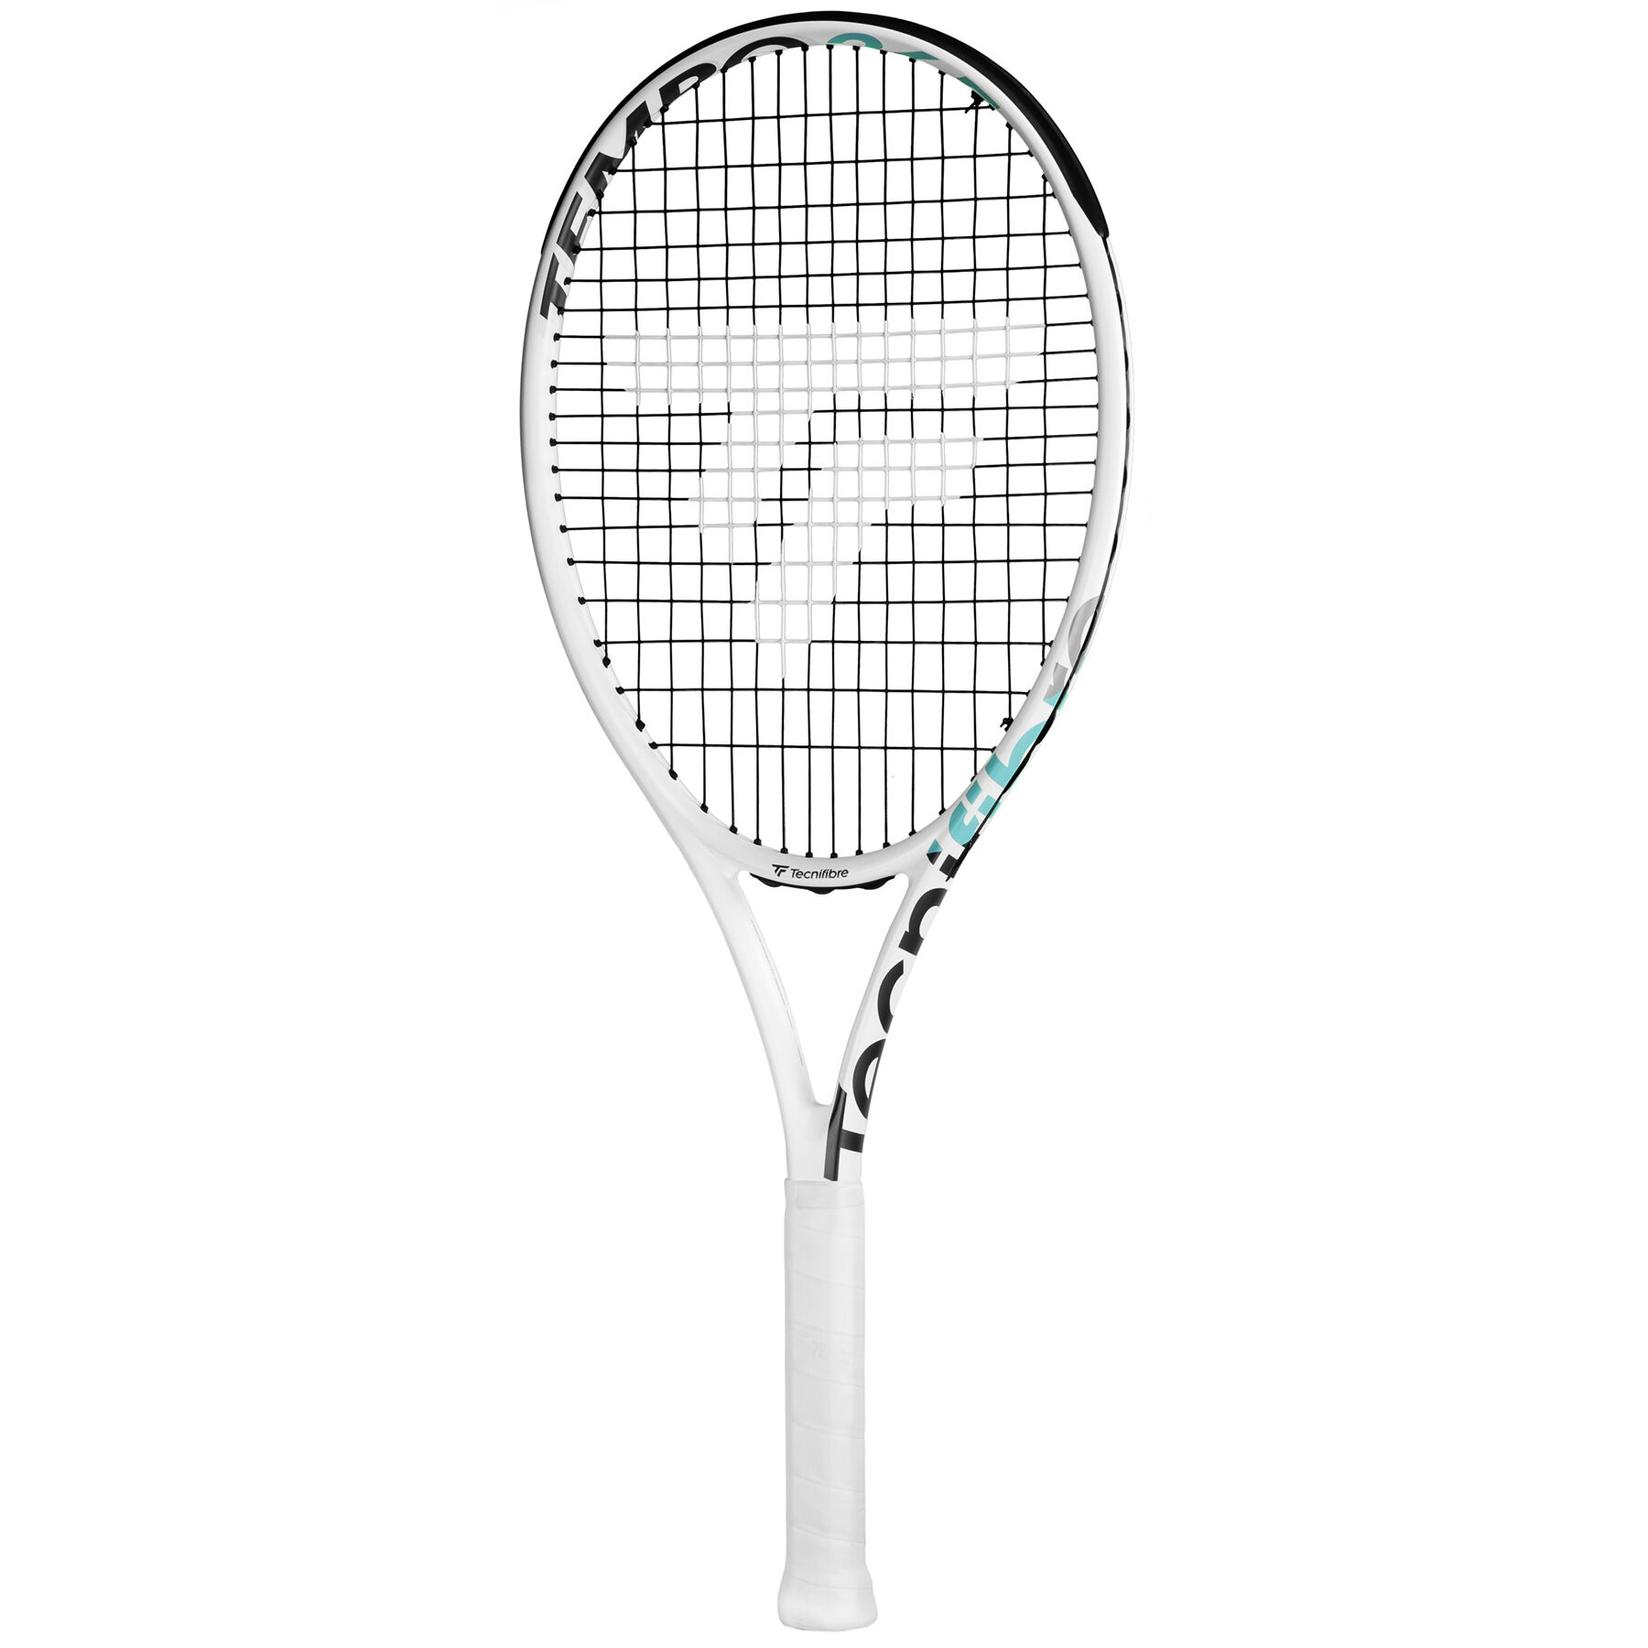 Selected image for TECNIFIBRE Reket Tempo 265 G2